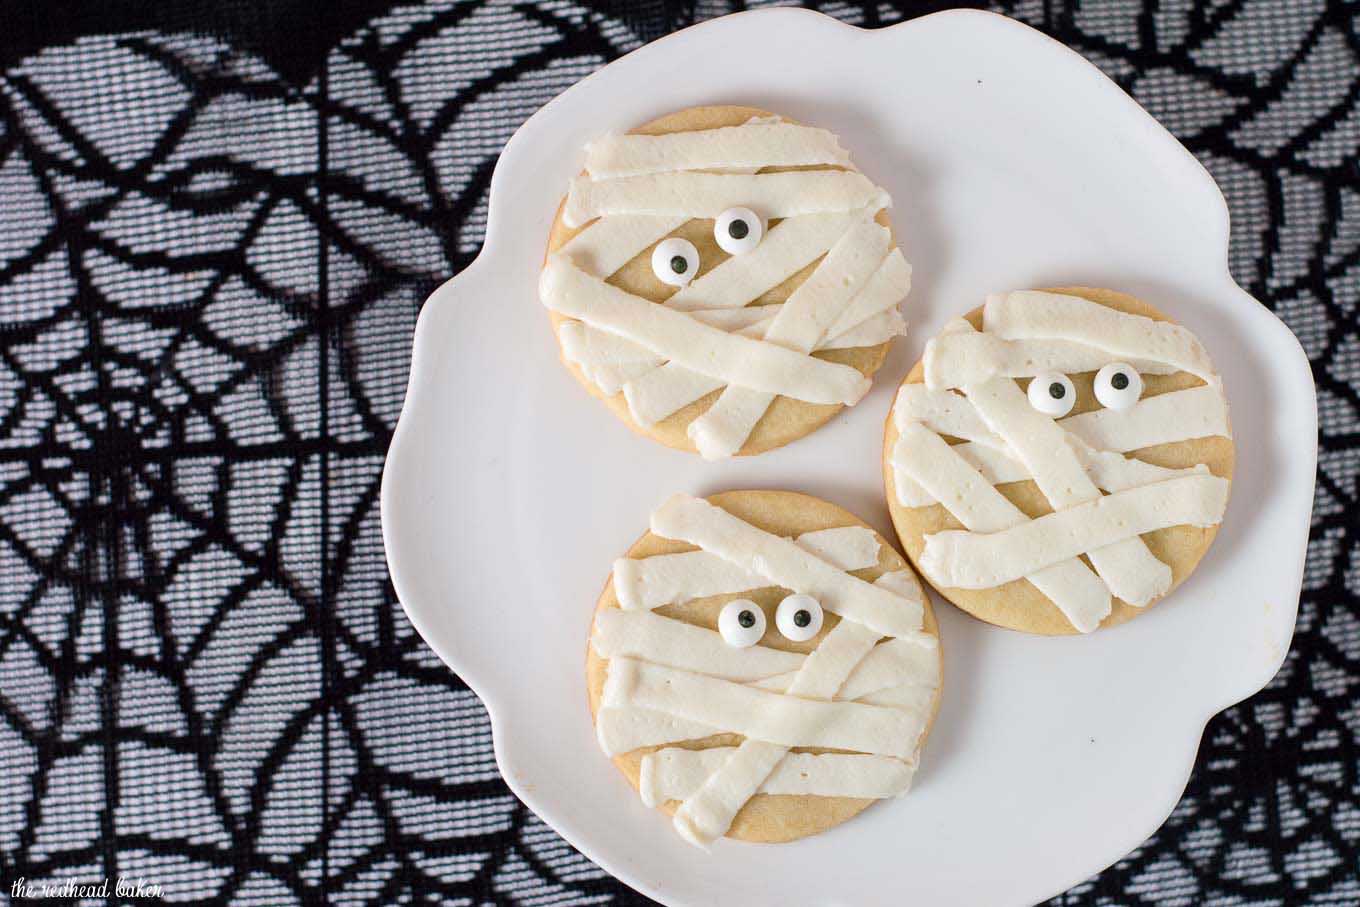 Scare up some easy Halloween treats — make these spooky mummy cookies. Simply pipe a few lines of frosting onto round sugar cookies, add candy eyes and you're done! #ProgressiveEats